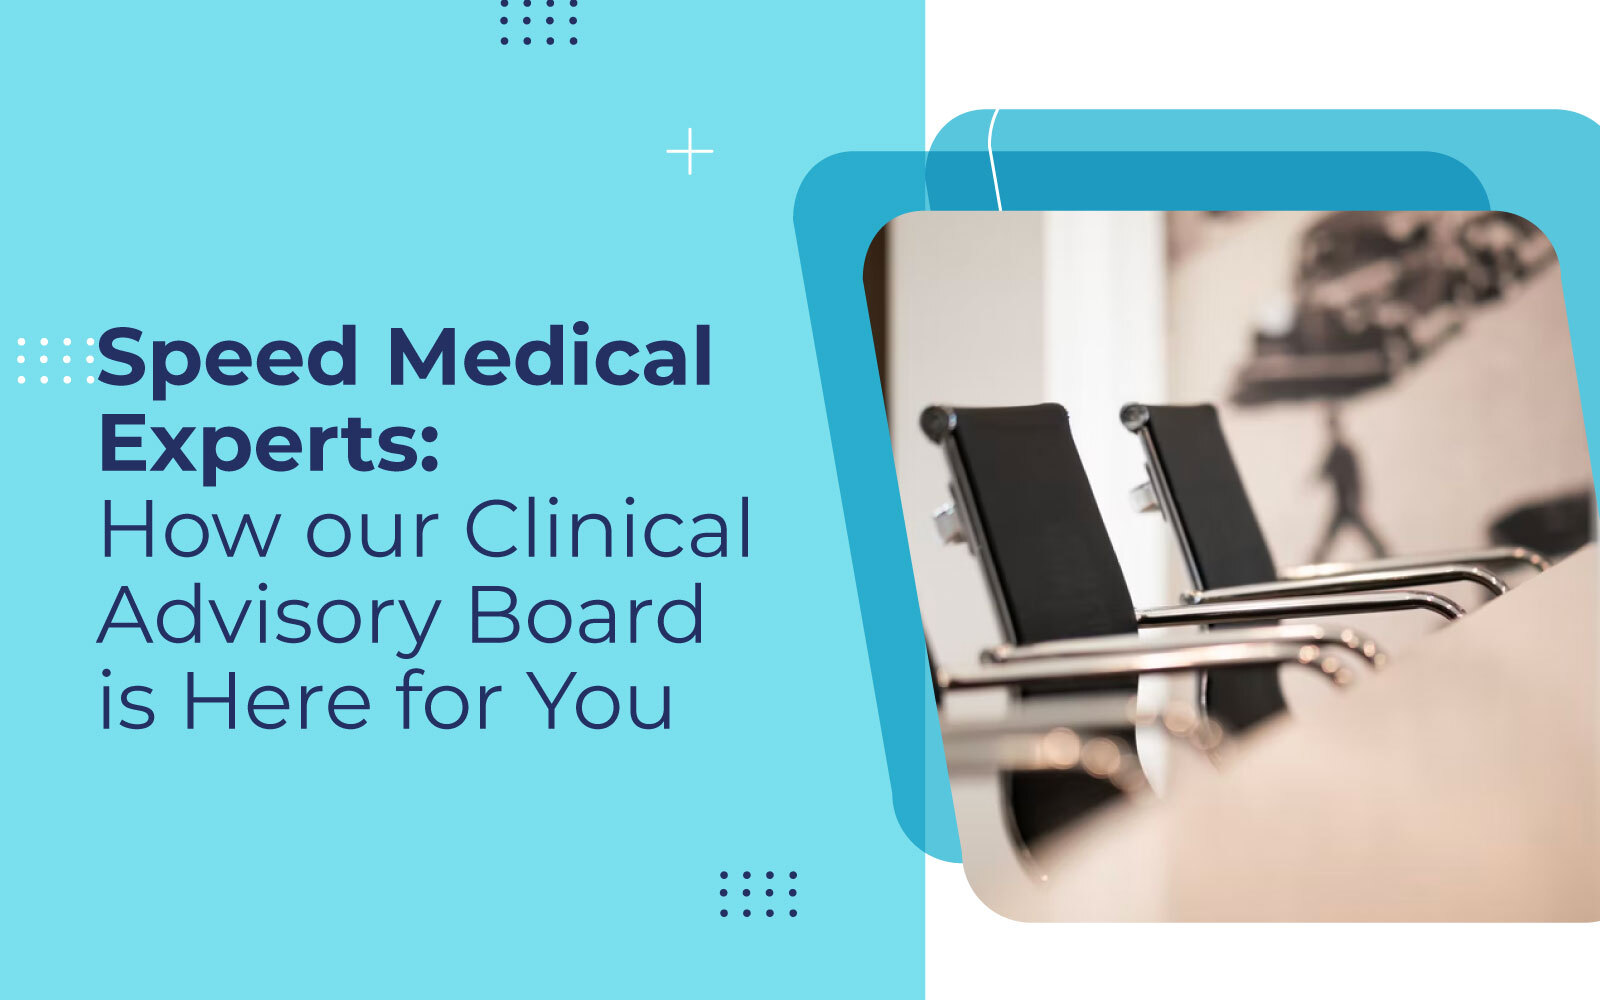 Speed Medical Experts: How our Clinical Advisory Board is Here for You